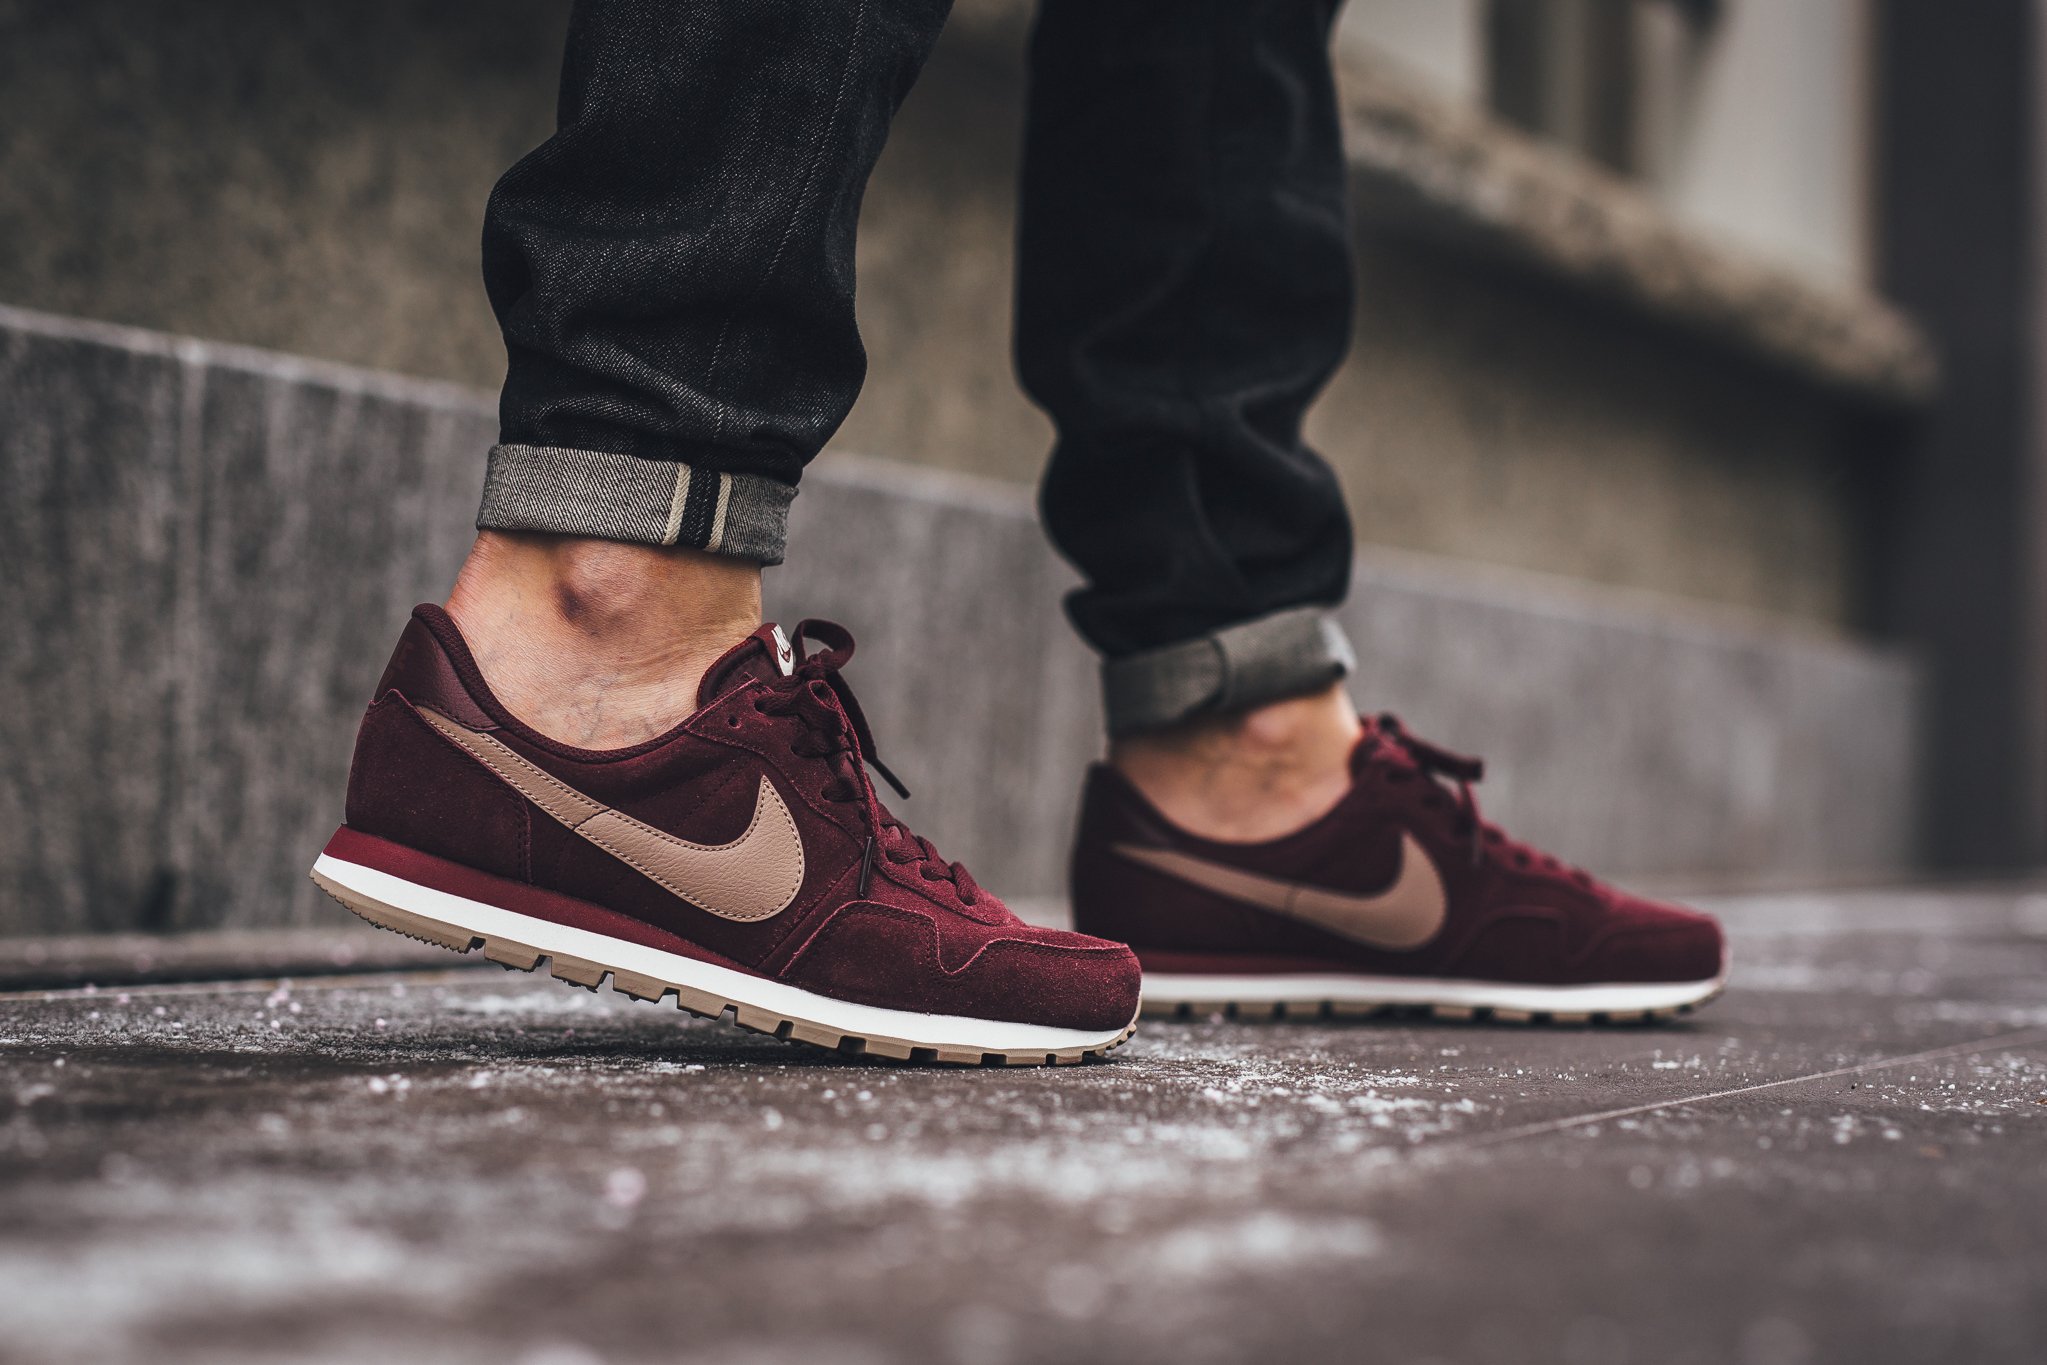 maletero bostezando Fabricación Titolo on Twitter: "Nike Air Pegasus 83 LTR - Night Maroon/Malt-Team Red  Slate Available now at Titolo SHOP HERE https://t.co/dbwt1Www0K  https://t.co/QWrEZ2mfui" / Twitter